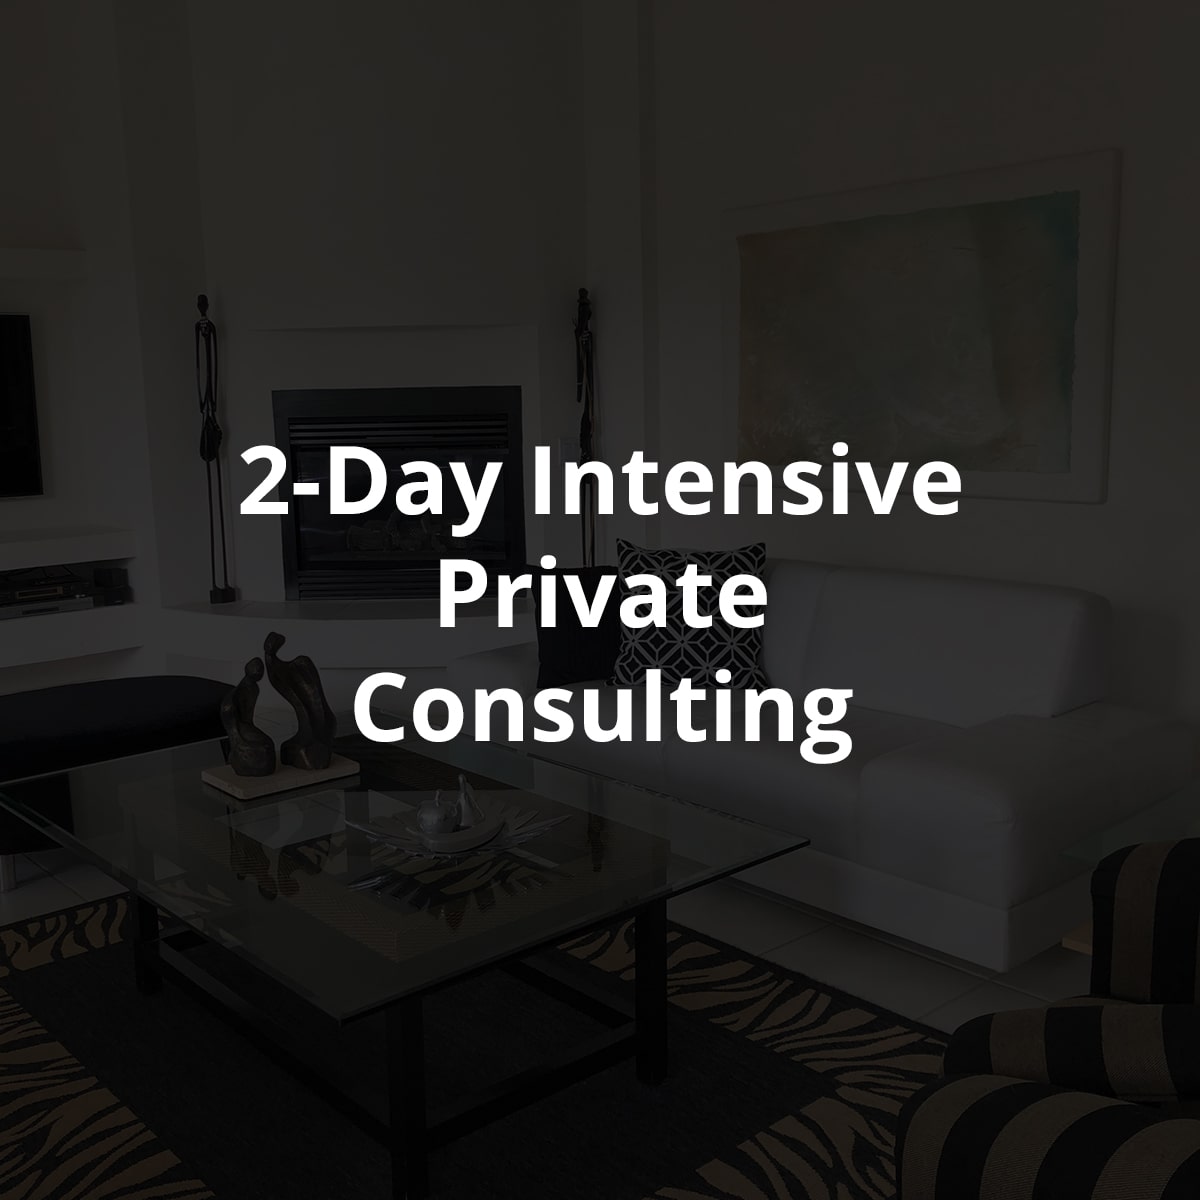 2-Day Intensive Private Consulting